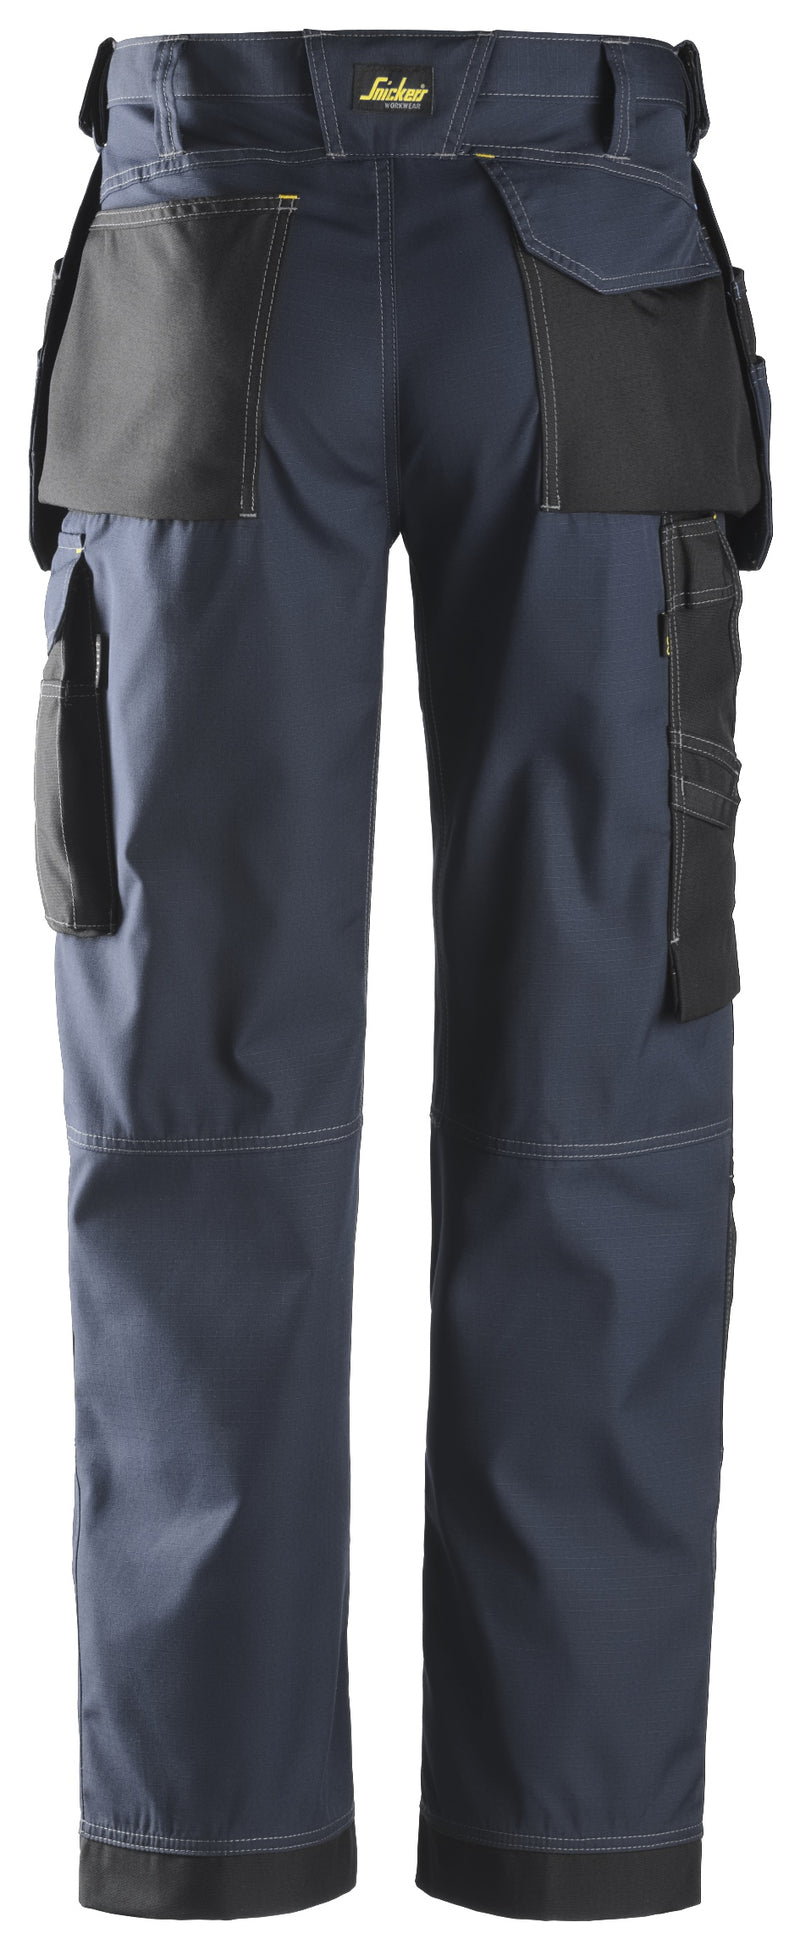 Snickers Craftsman Holster Pockets Trousers Rip-Stop, Navy/Black, Size 116